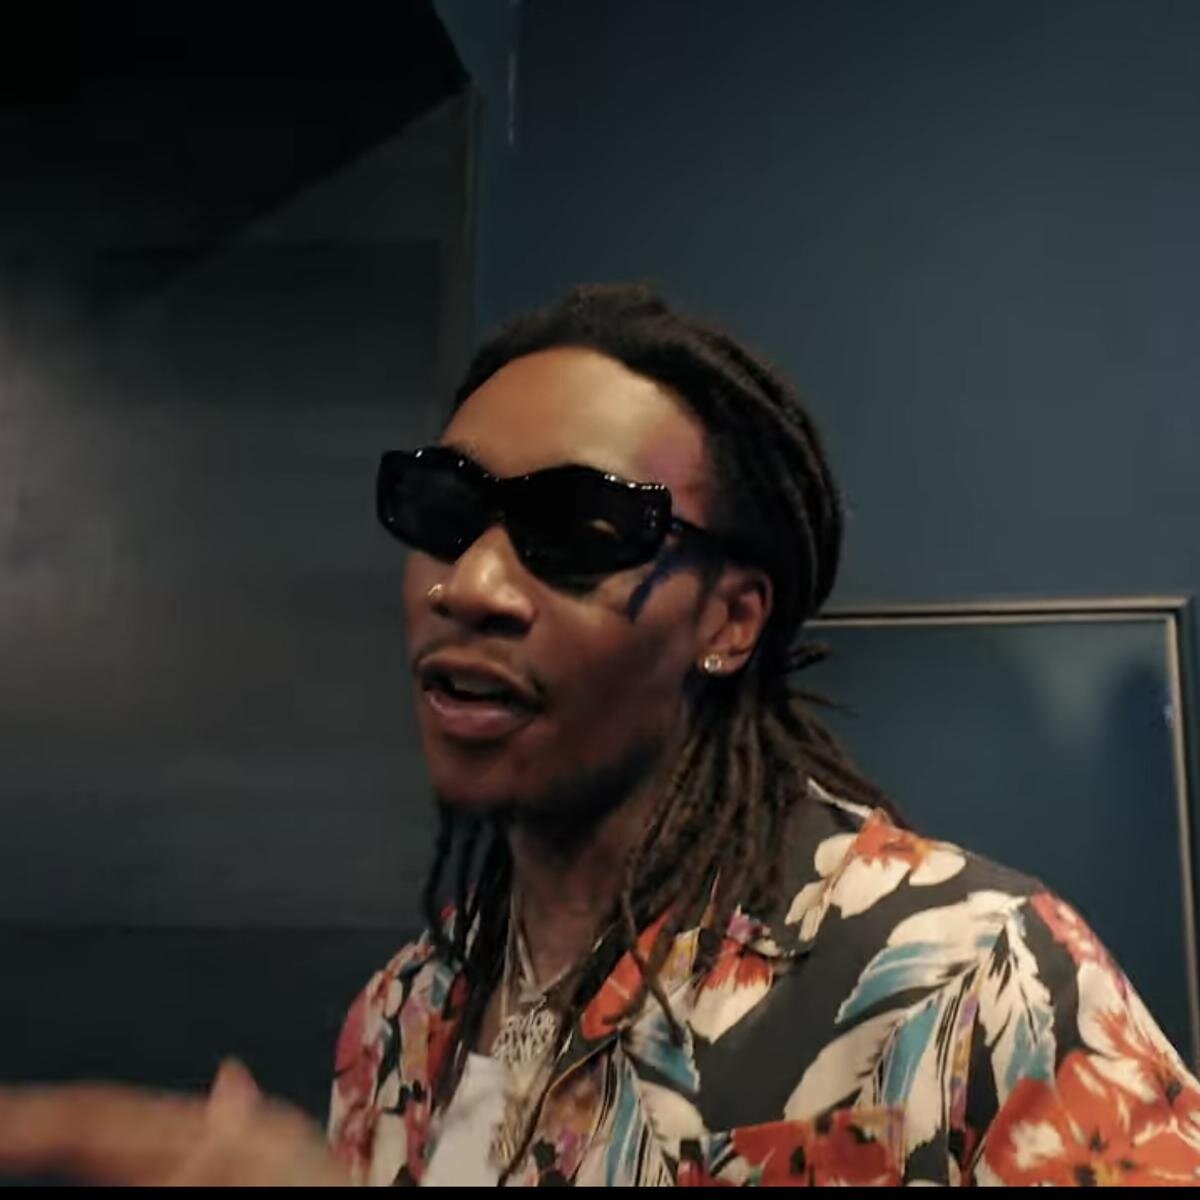 Wiz Khalifa & 24hrs on latest single 'Dreams' [Music Video] — Melody Bites  - The Top Music News Source